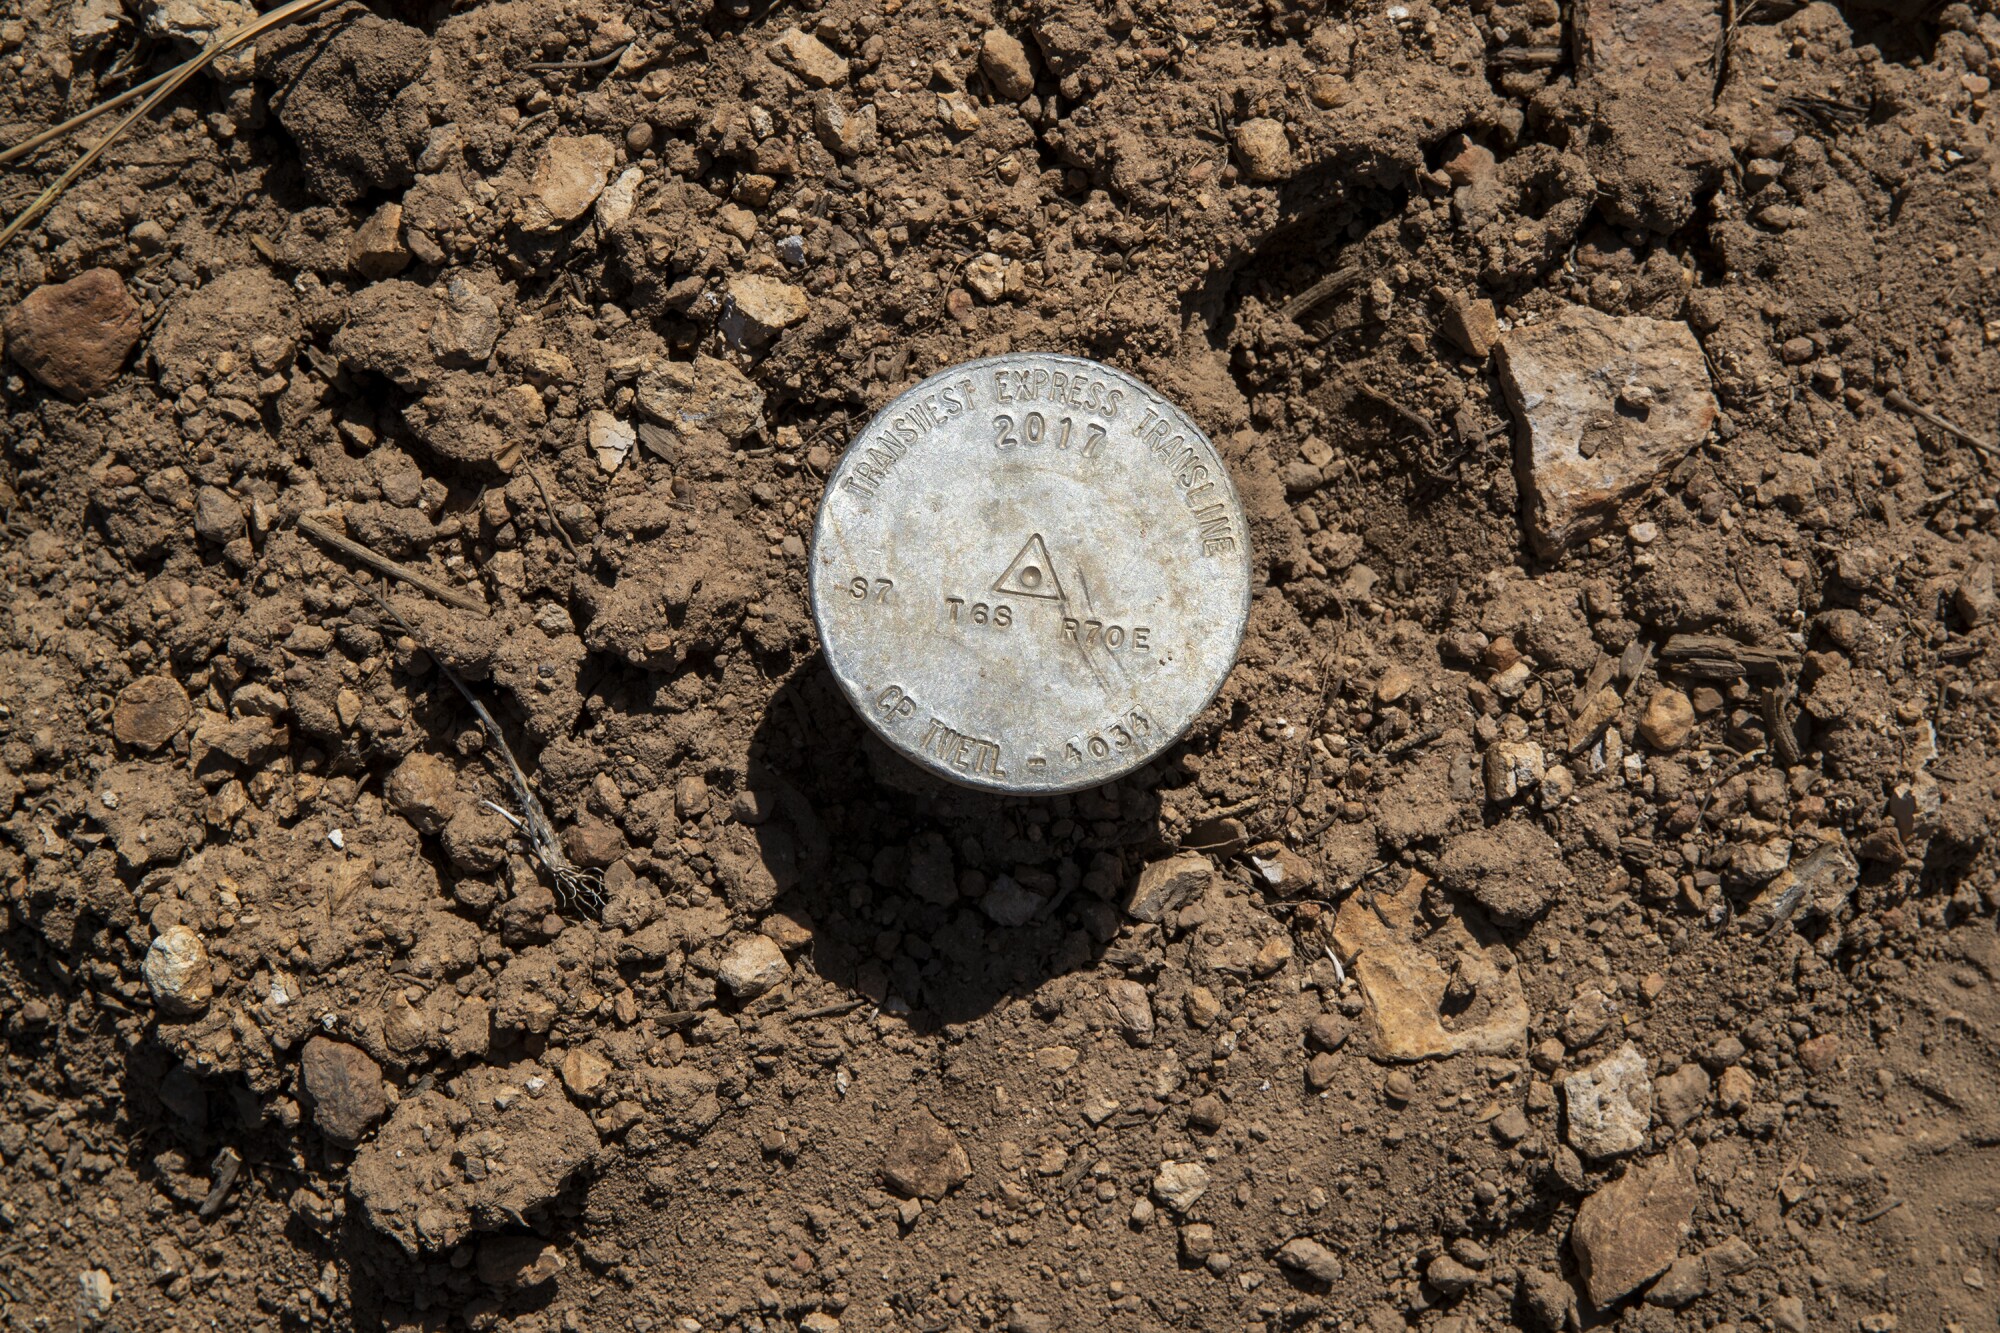 A TransWest Express survey marker along Mud Springs Road near Brent Hafen's ranch.